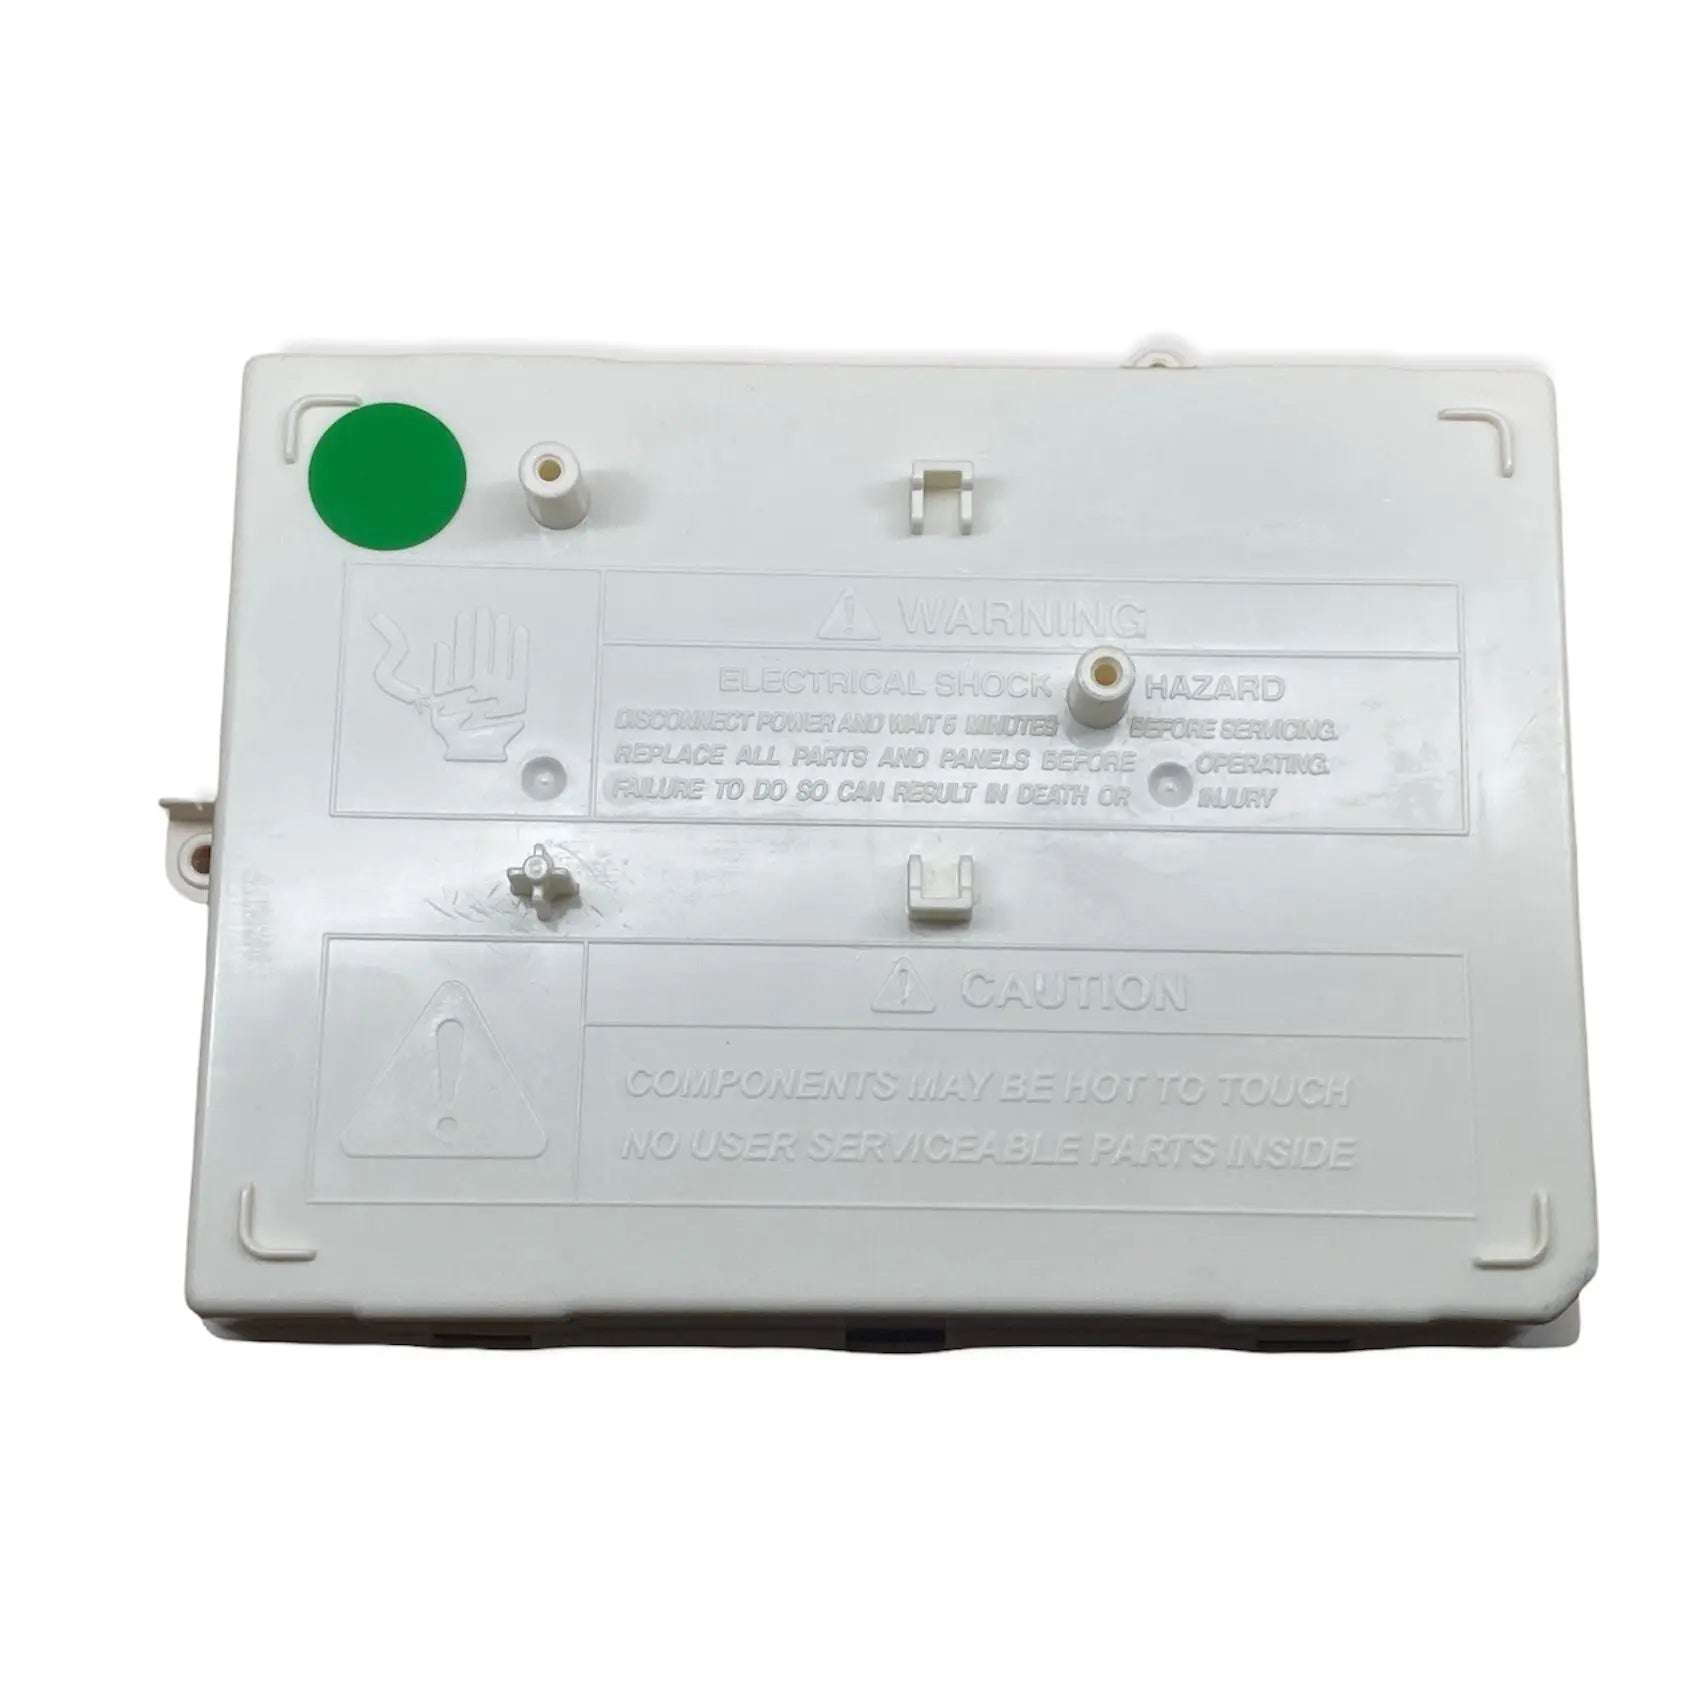 G.E Washer Power Control Board Assembly (PCB) -  WH12X10281 or WH12X10245,  REPLACES : WH12X10281X, WH12X10281, WH12X10281R, WH12X10281A, WH12X10281C, WG04F02313, 1168675, AP38833974, PS960658, EAP960658, PD0000150 INVERTEC